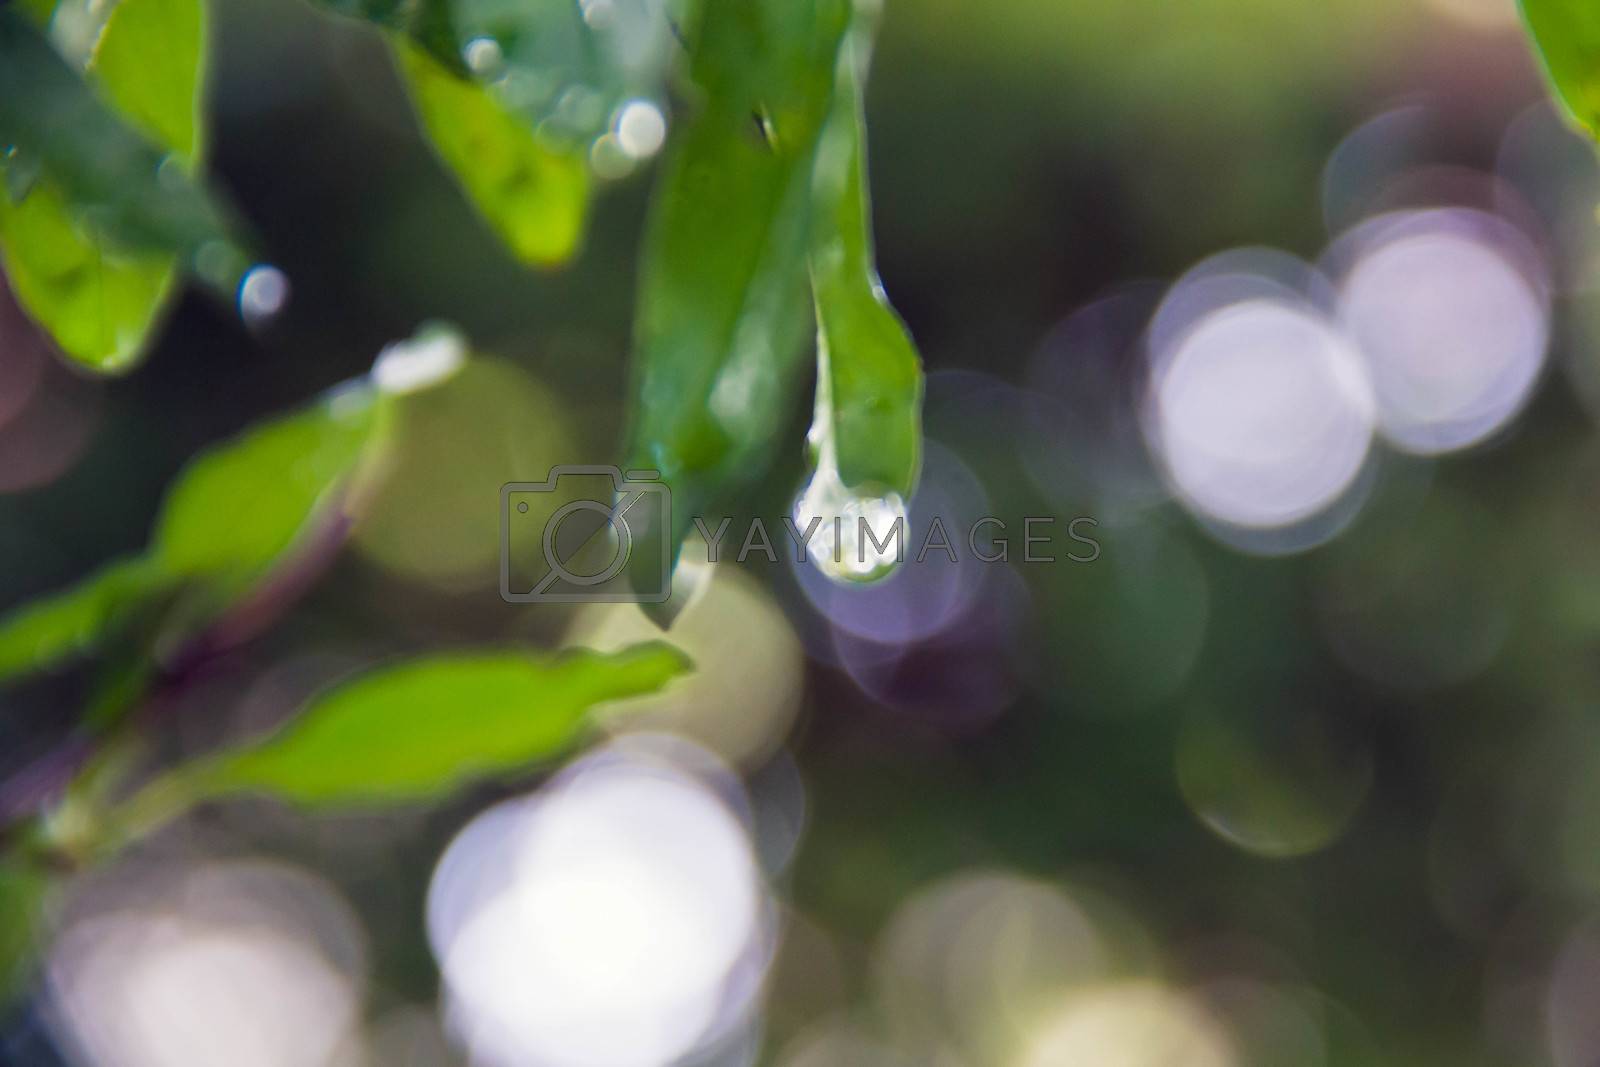 Royalty free image of Closeup water drops on green leave by STZU